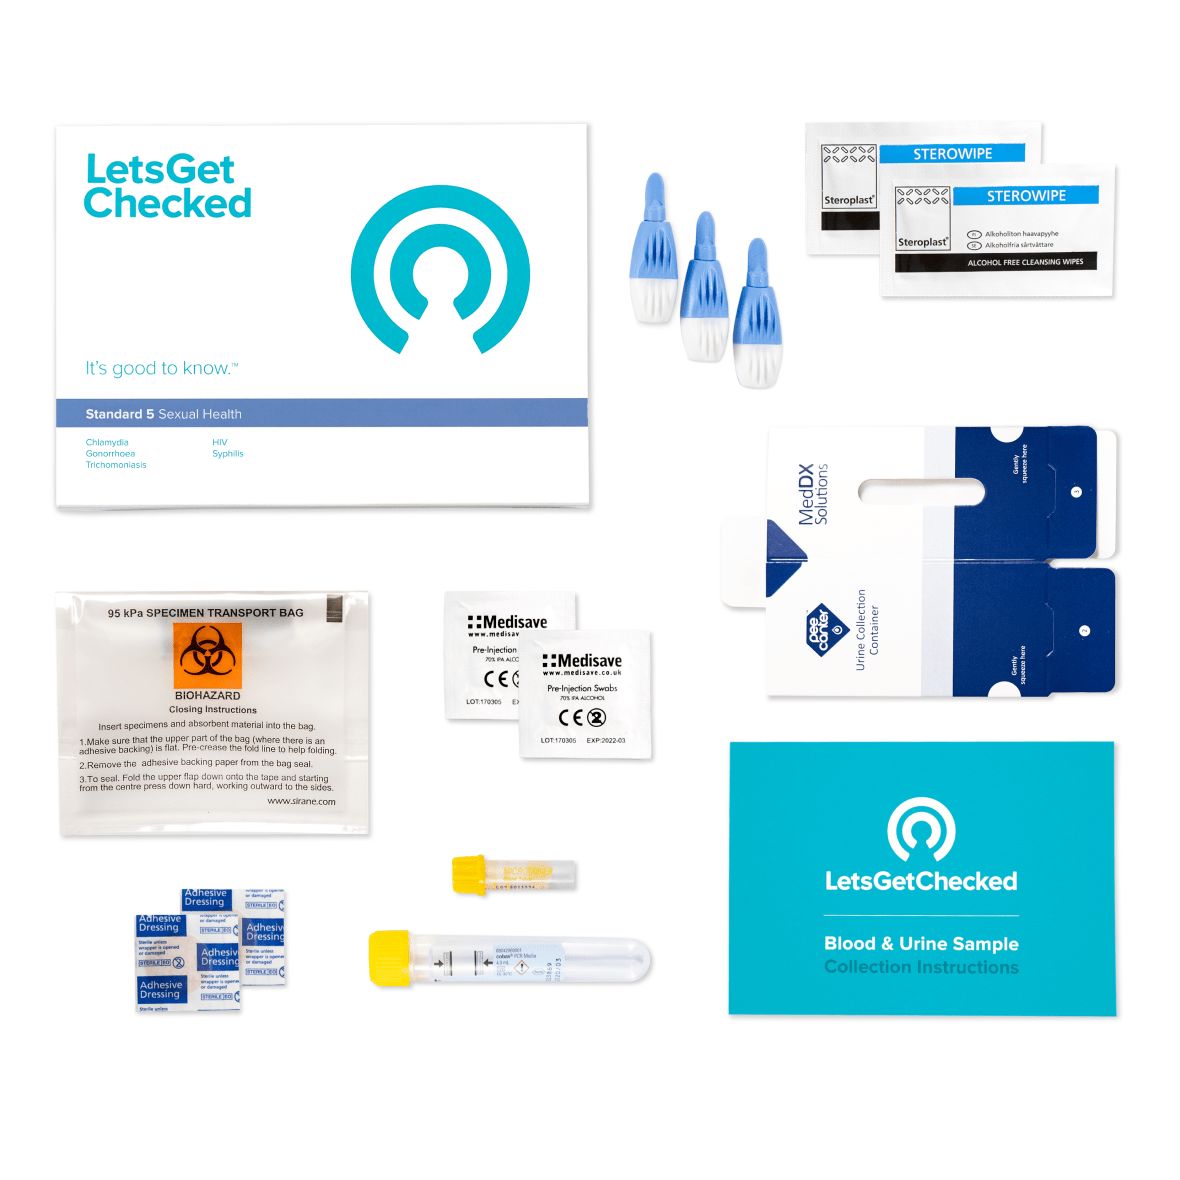 DISCLetsGetChecked Standard 5 at Home STD Test